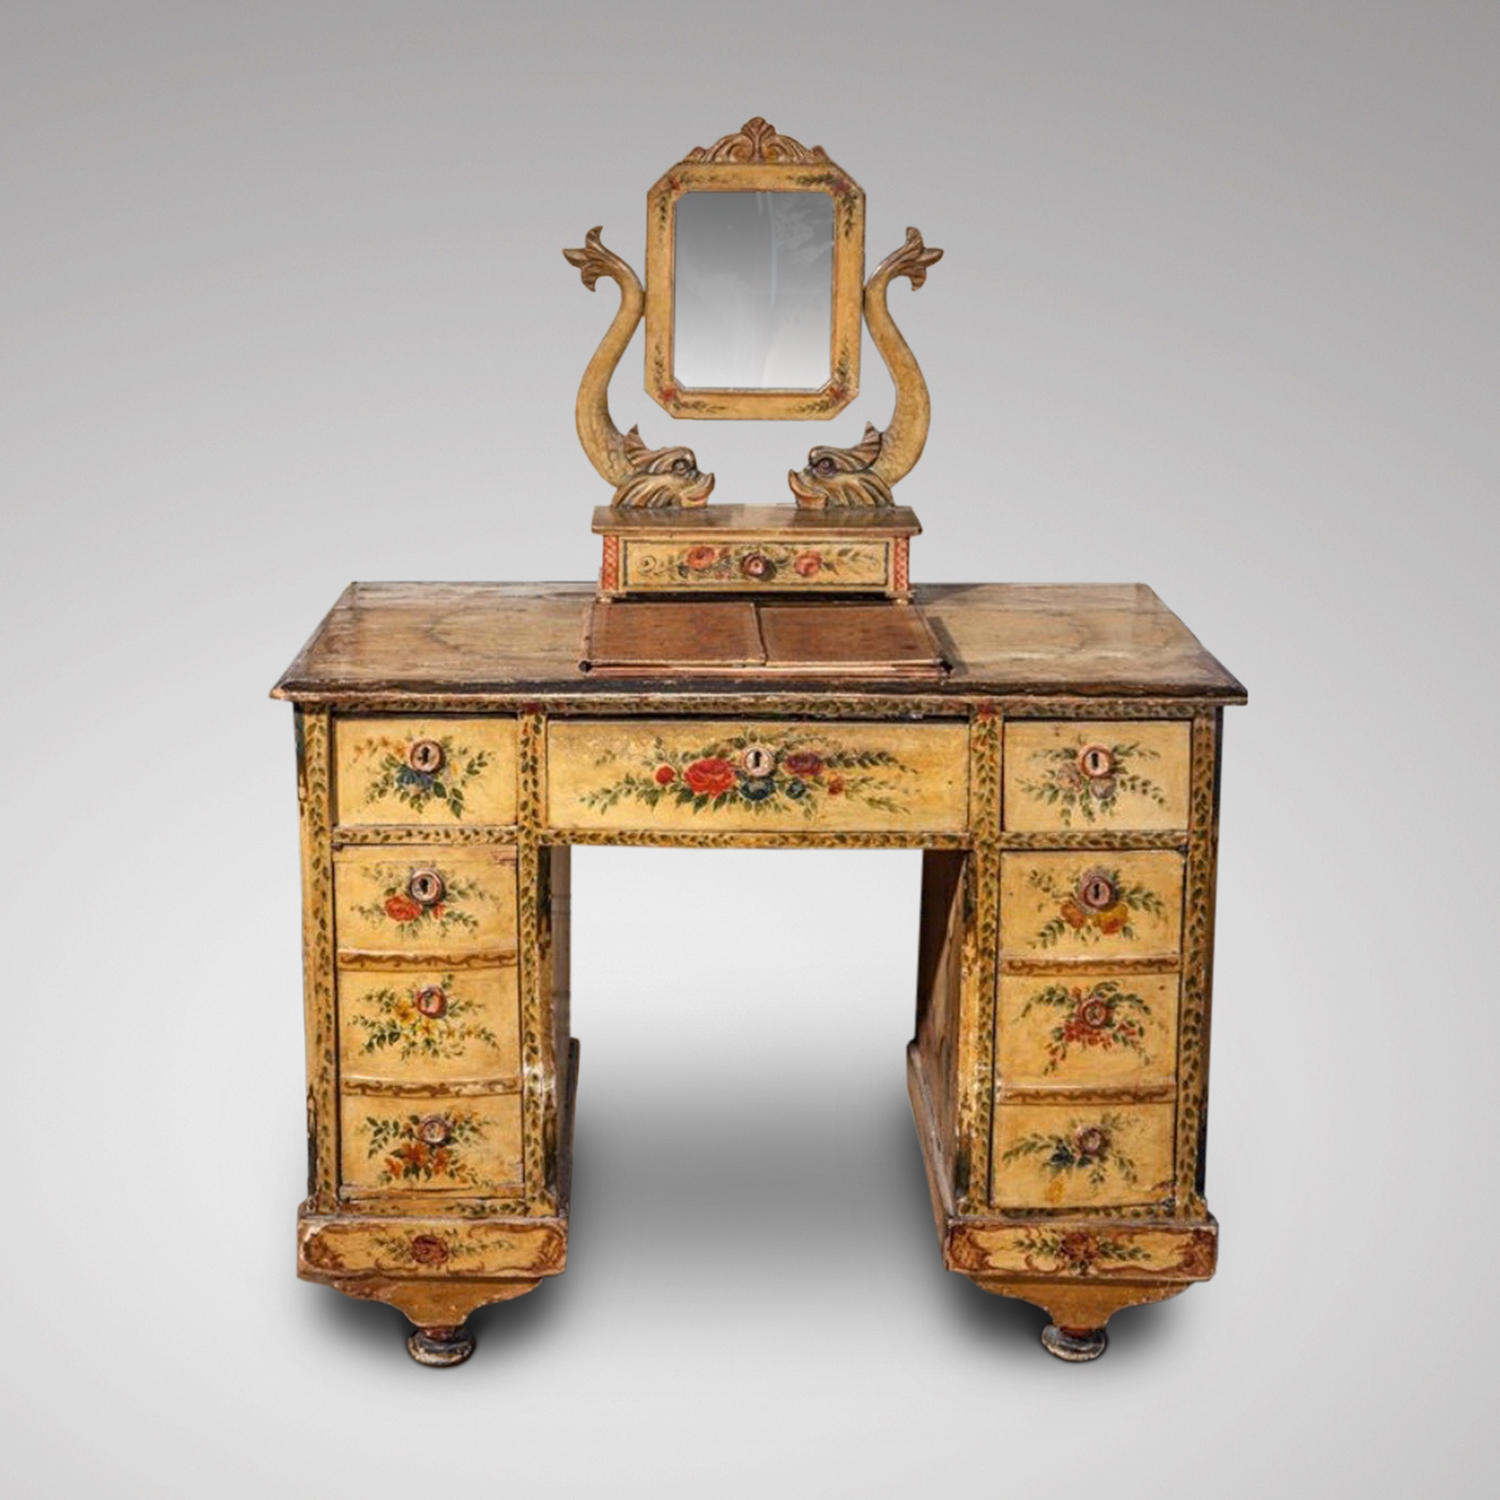 Early 19th century Italian decorated dressing table